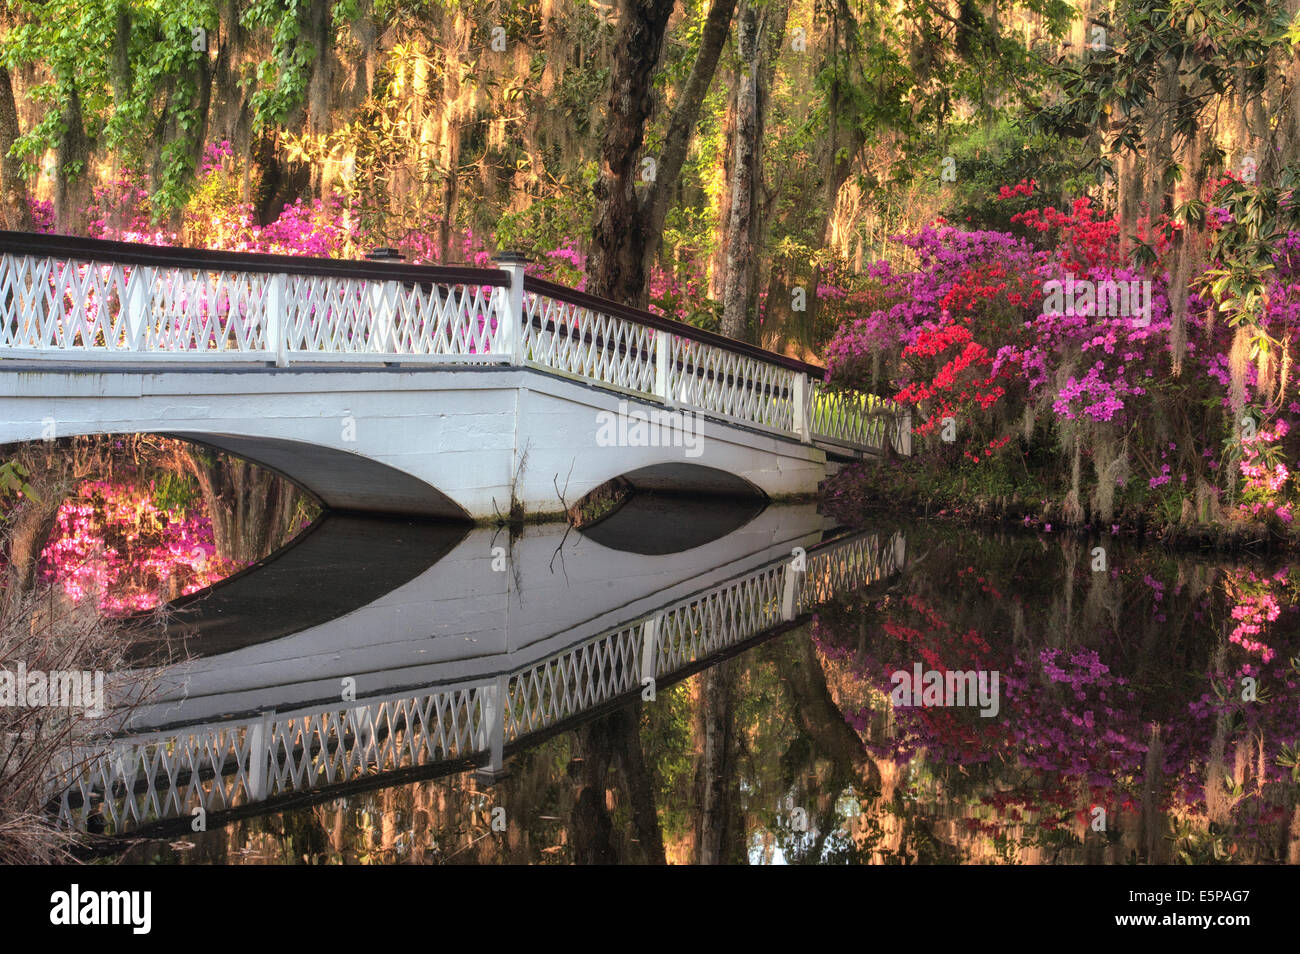 White Bridge leads the eye toa  beautiful bower of flowers and reflections of the flowers in water. Stock Photo